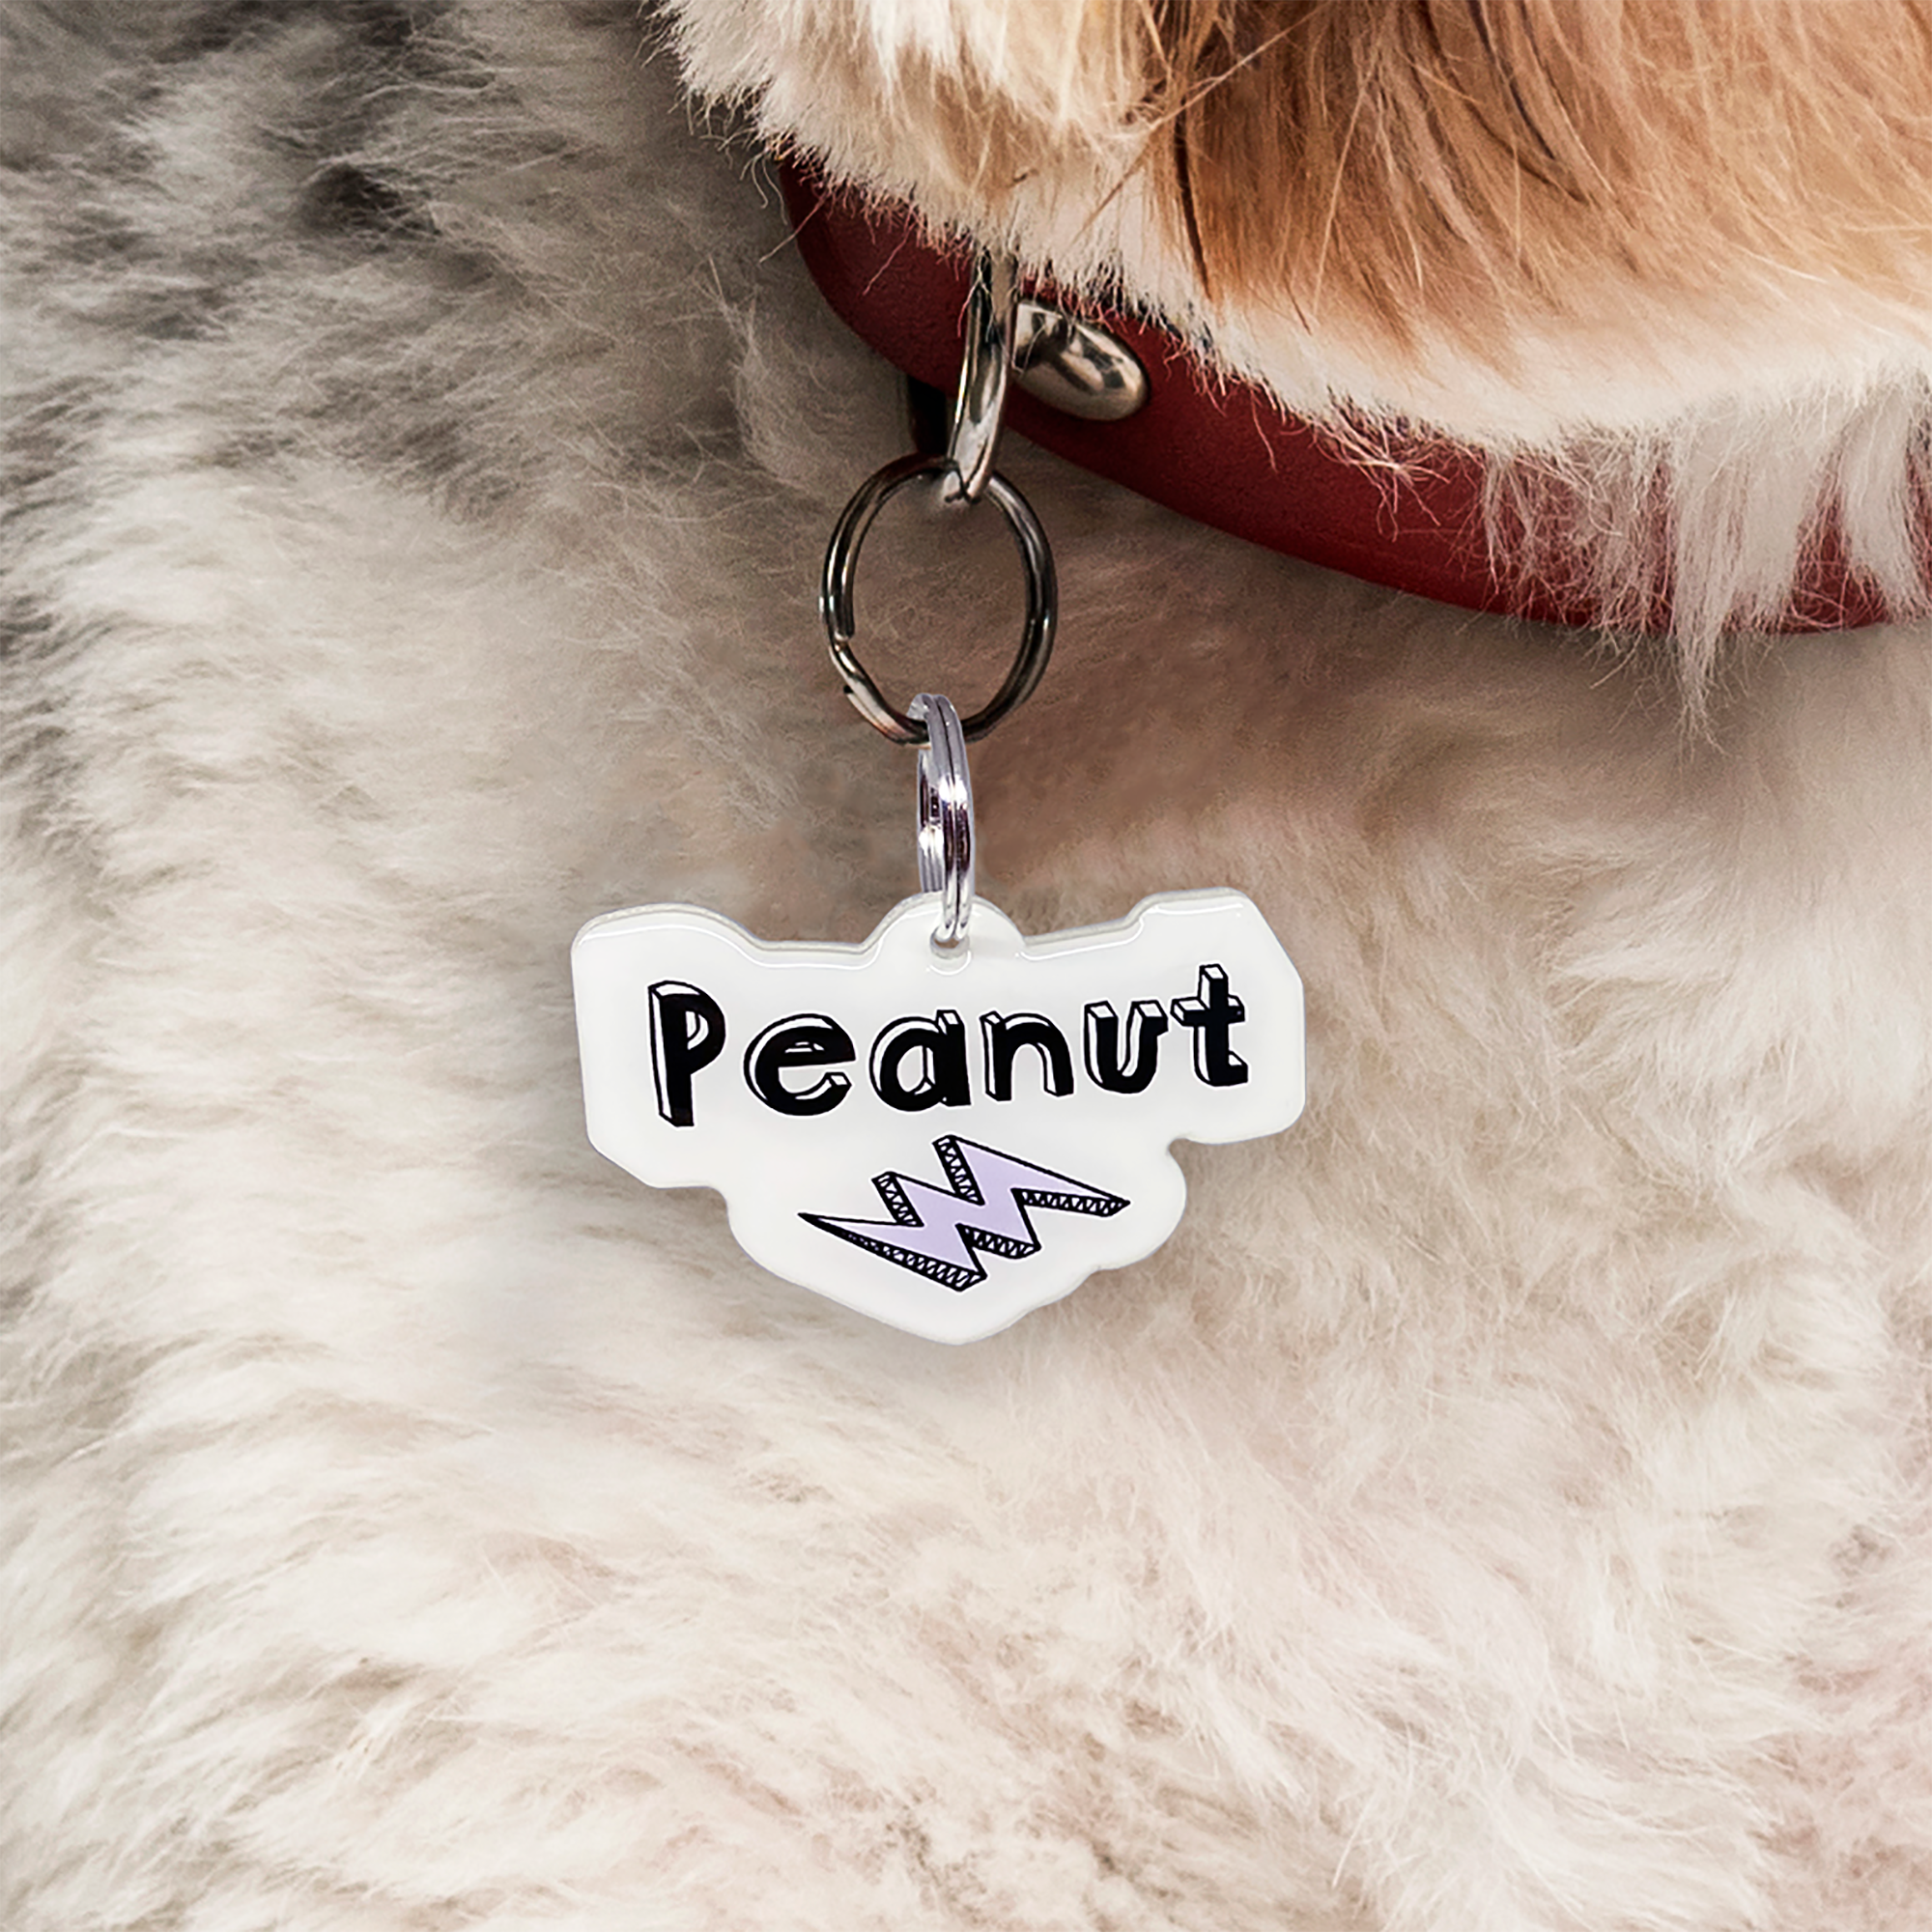 White + Lavender Lightning Bolt - 2x Tags Dog Name Tags by Bashtags